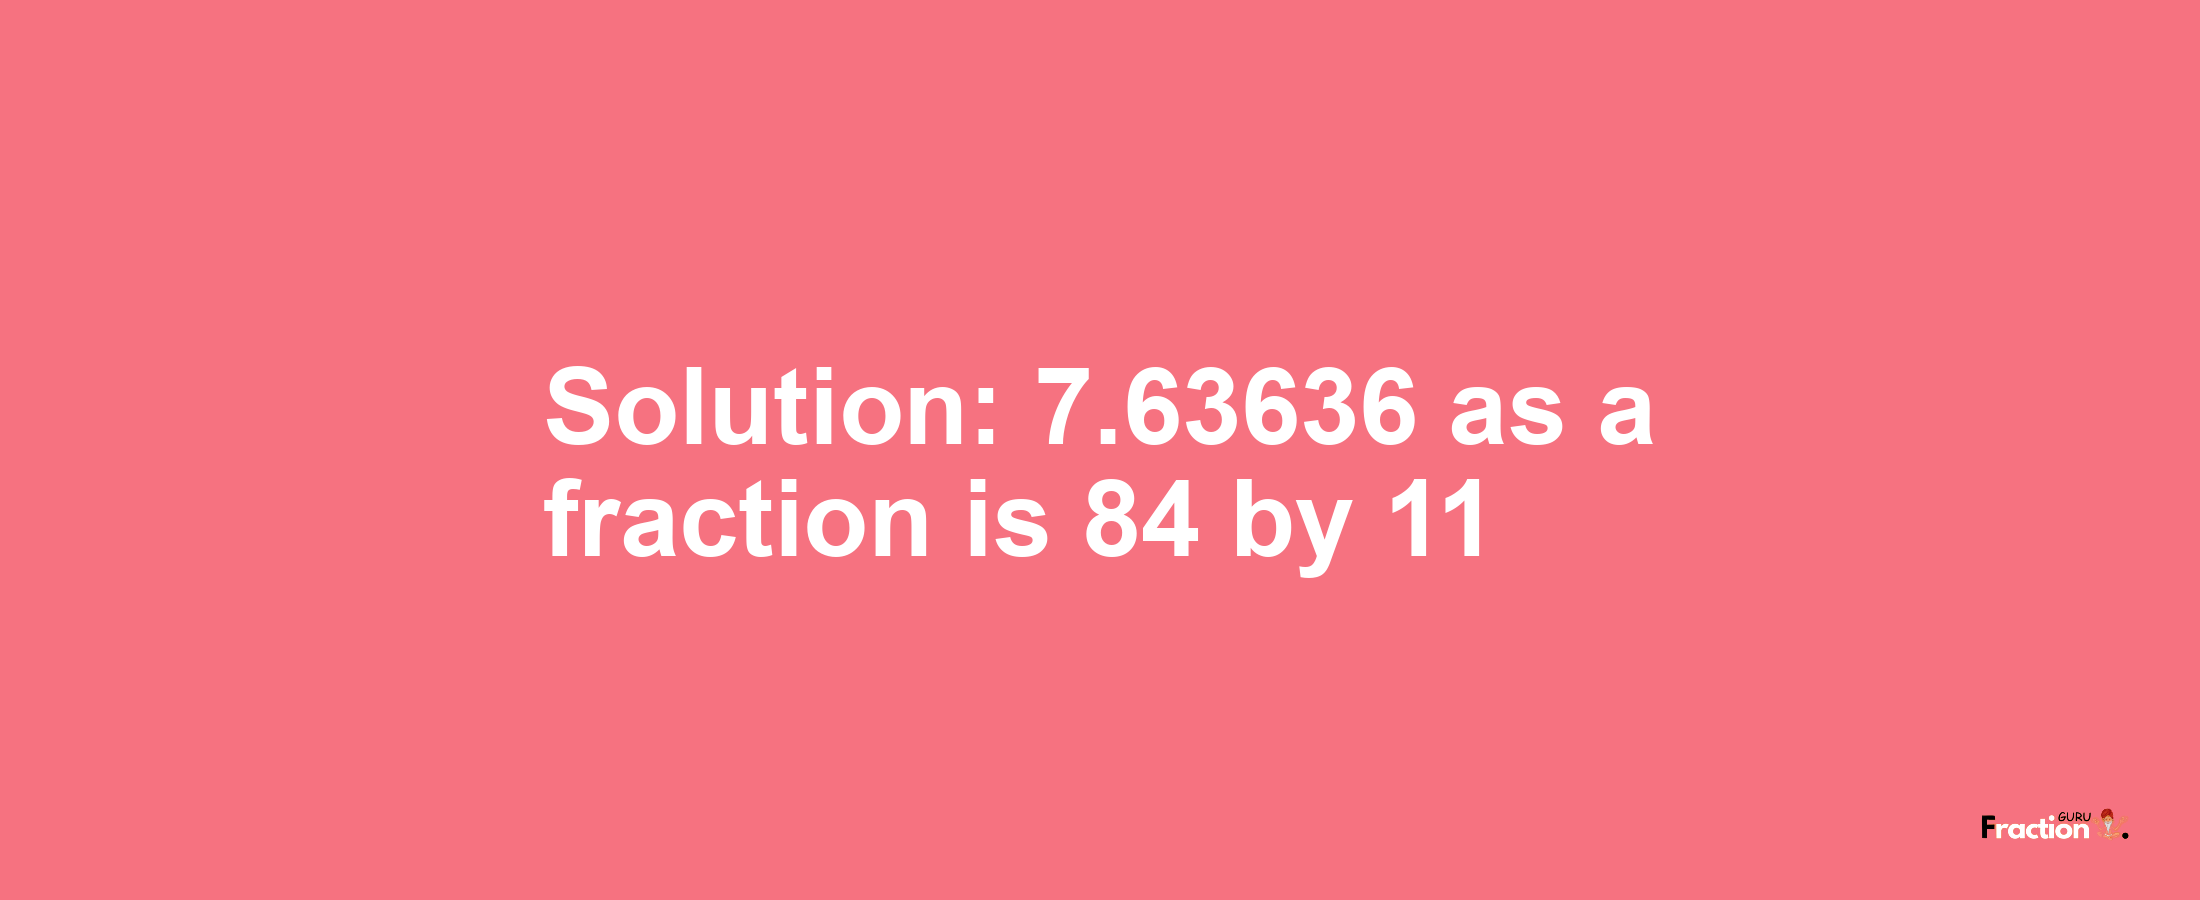 Solution:7.63636 as a fraction is 84/11